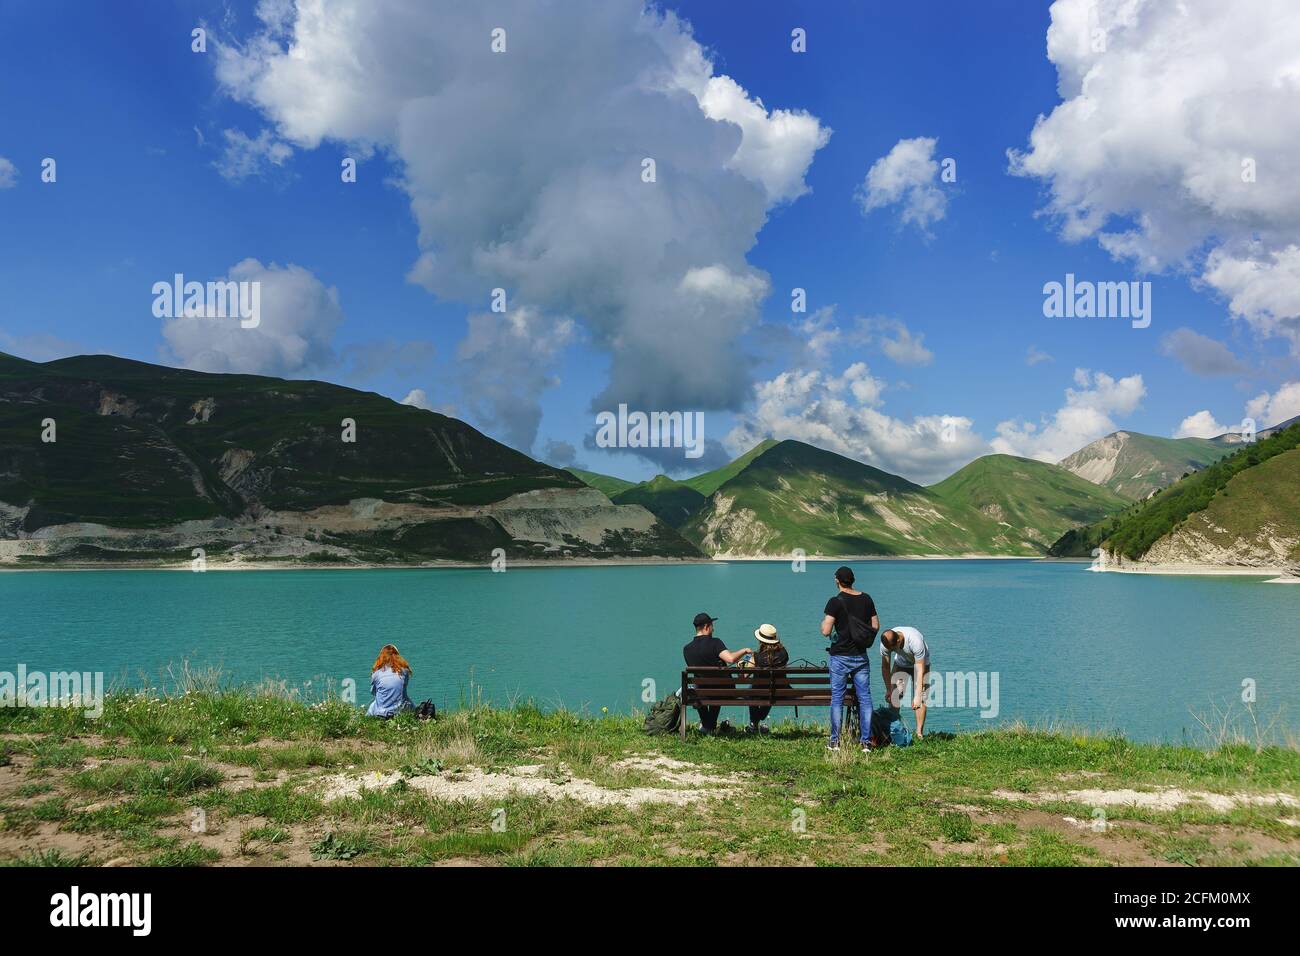 Vedensky district, Chechen Republic, Russia - June 01, 2019: Tourists sit on a bench on the shore of lake Kezenoi am. Green grass on the mountain slop Stock Photo